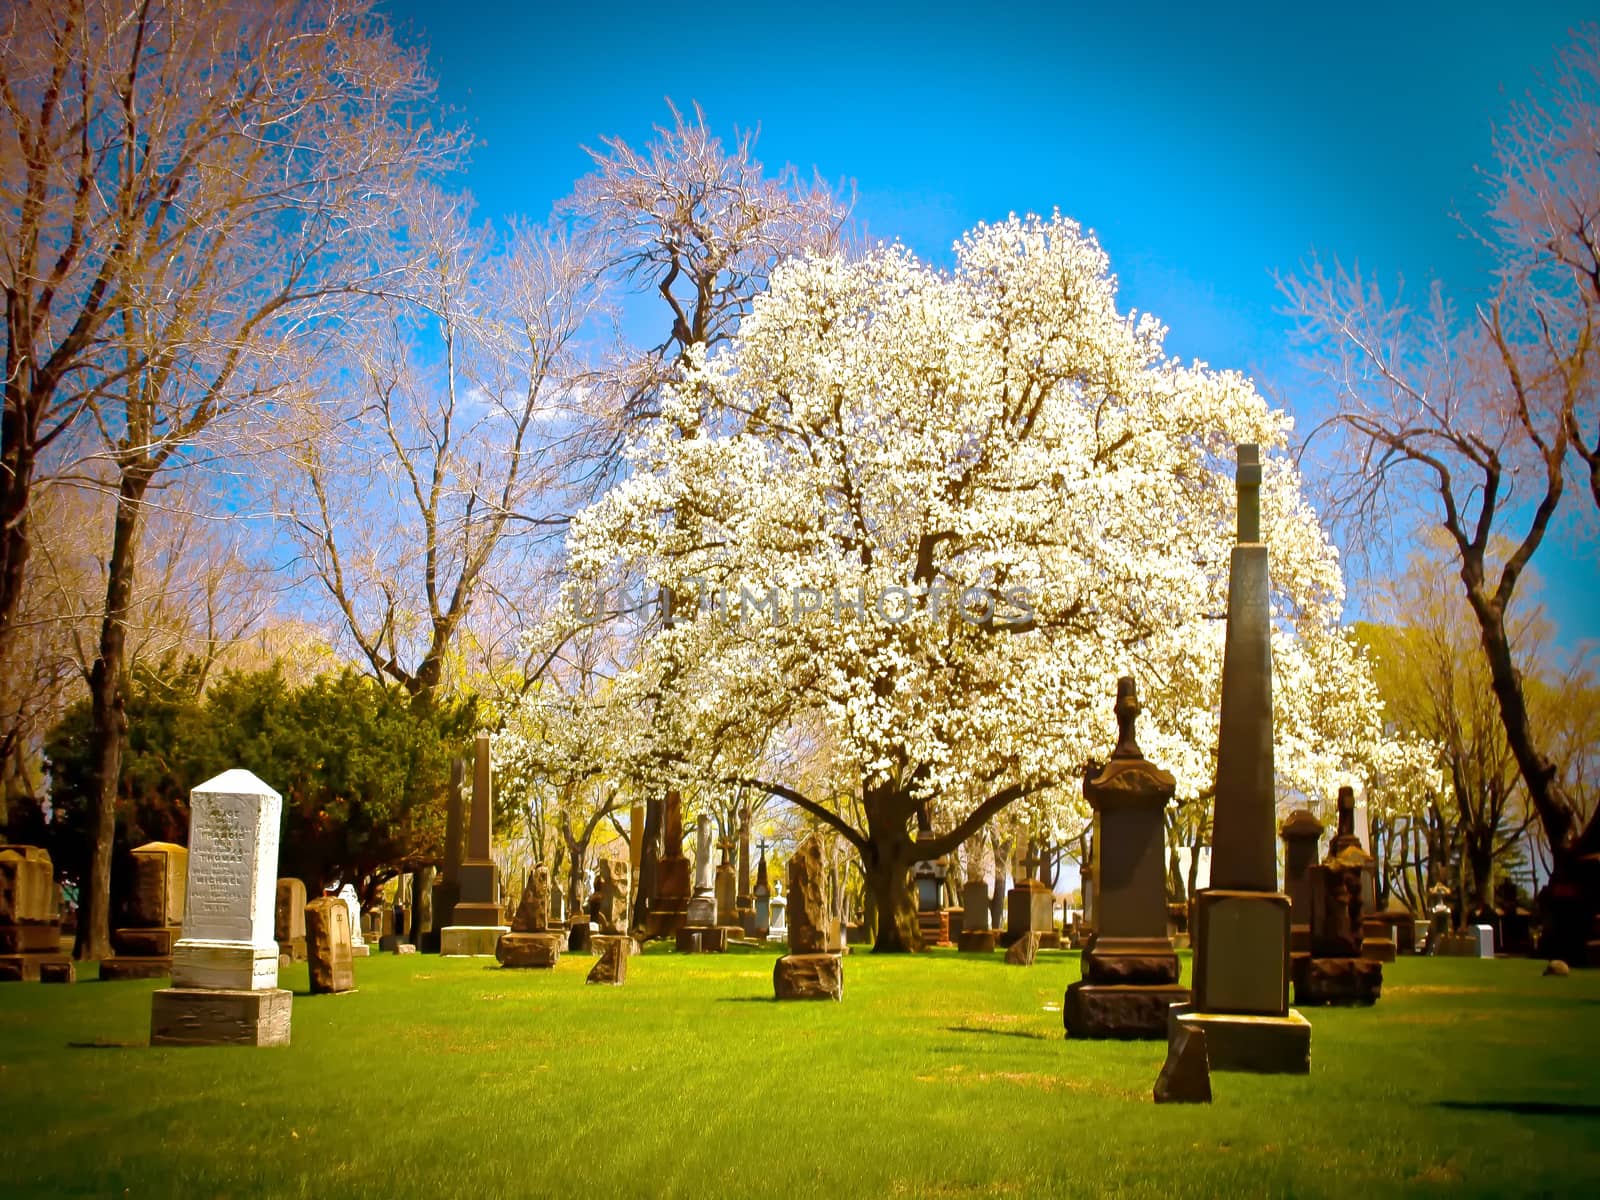 Blooming tree full of life amongst the gravestones at cemetery.